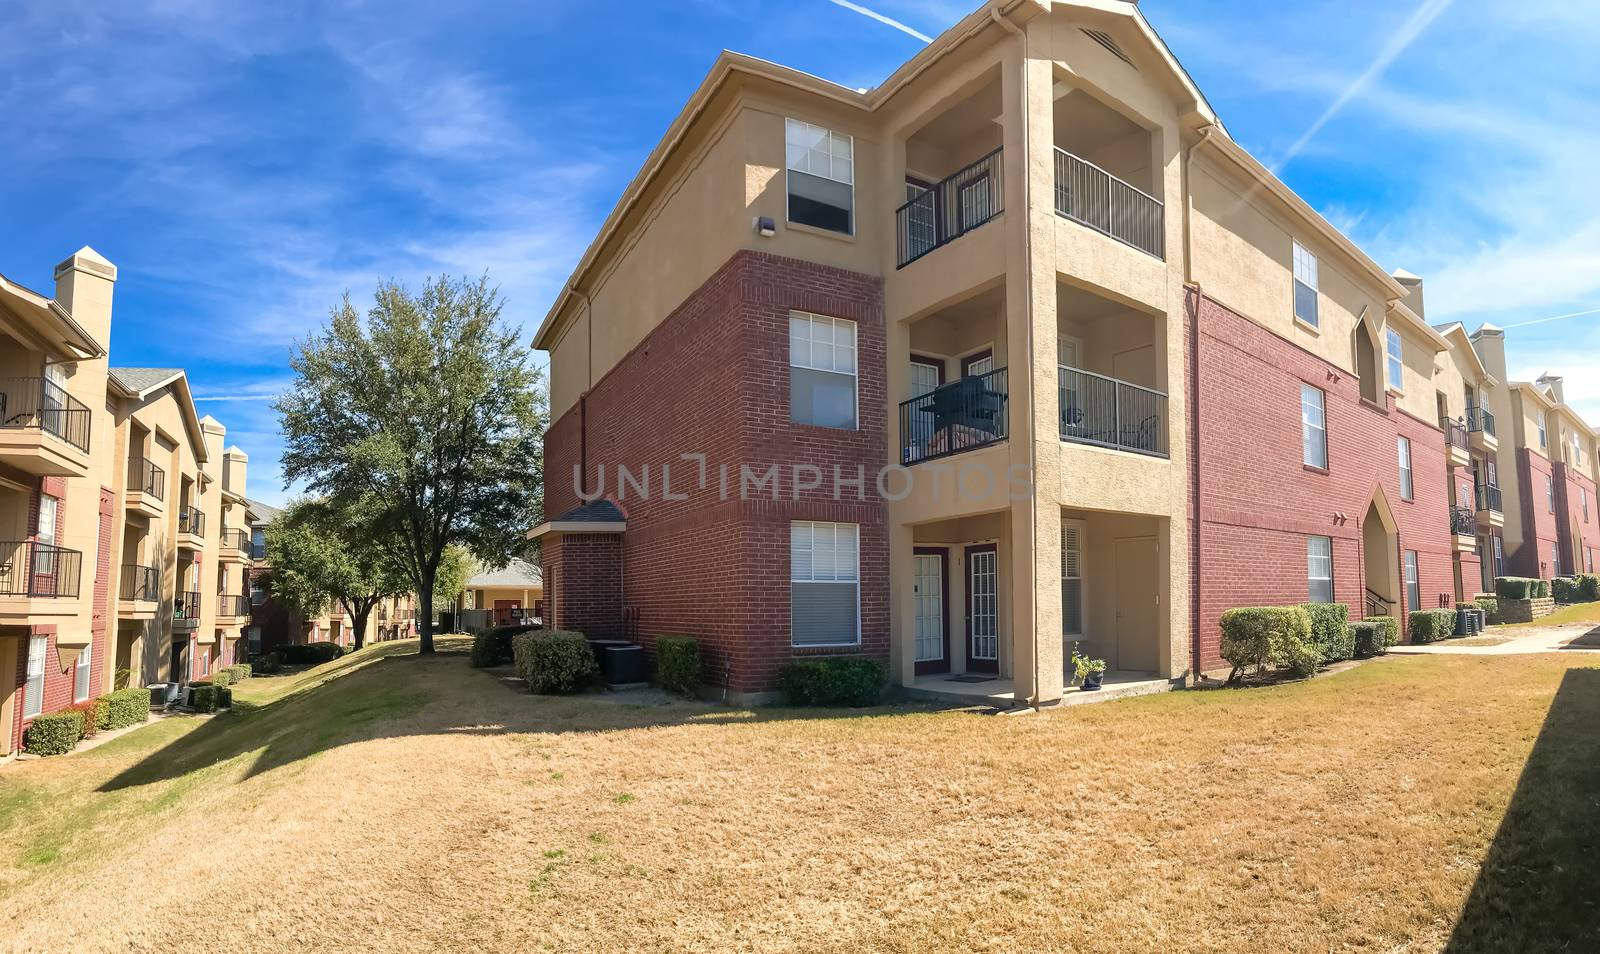 Panorama view modern apartment complex building with steep backyard in Lewisville, Texas, USA. Sunny spring day with cloud blue sky